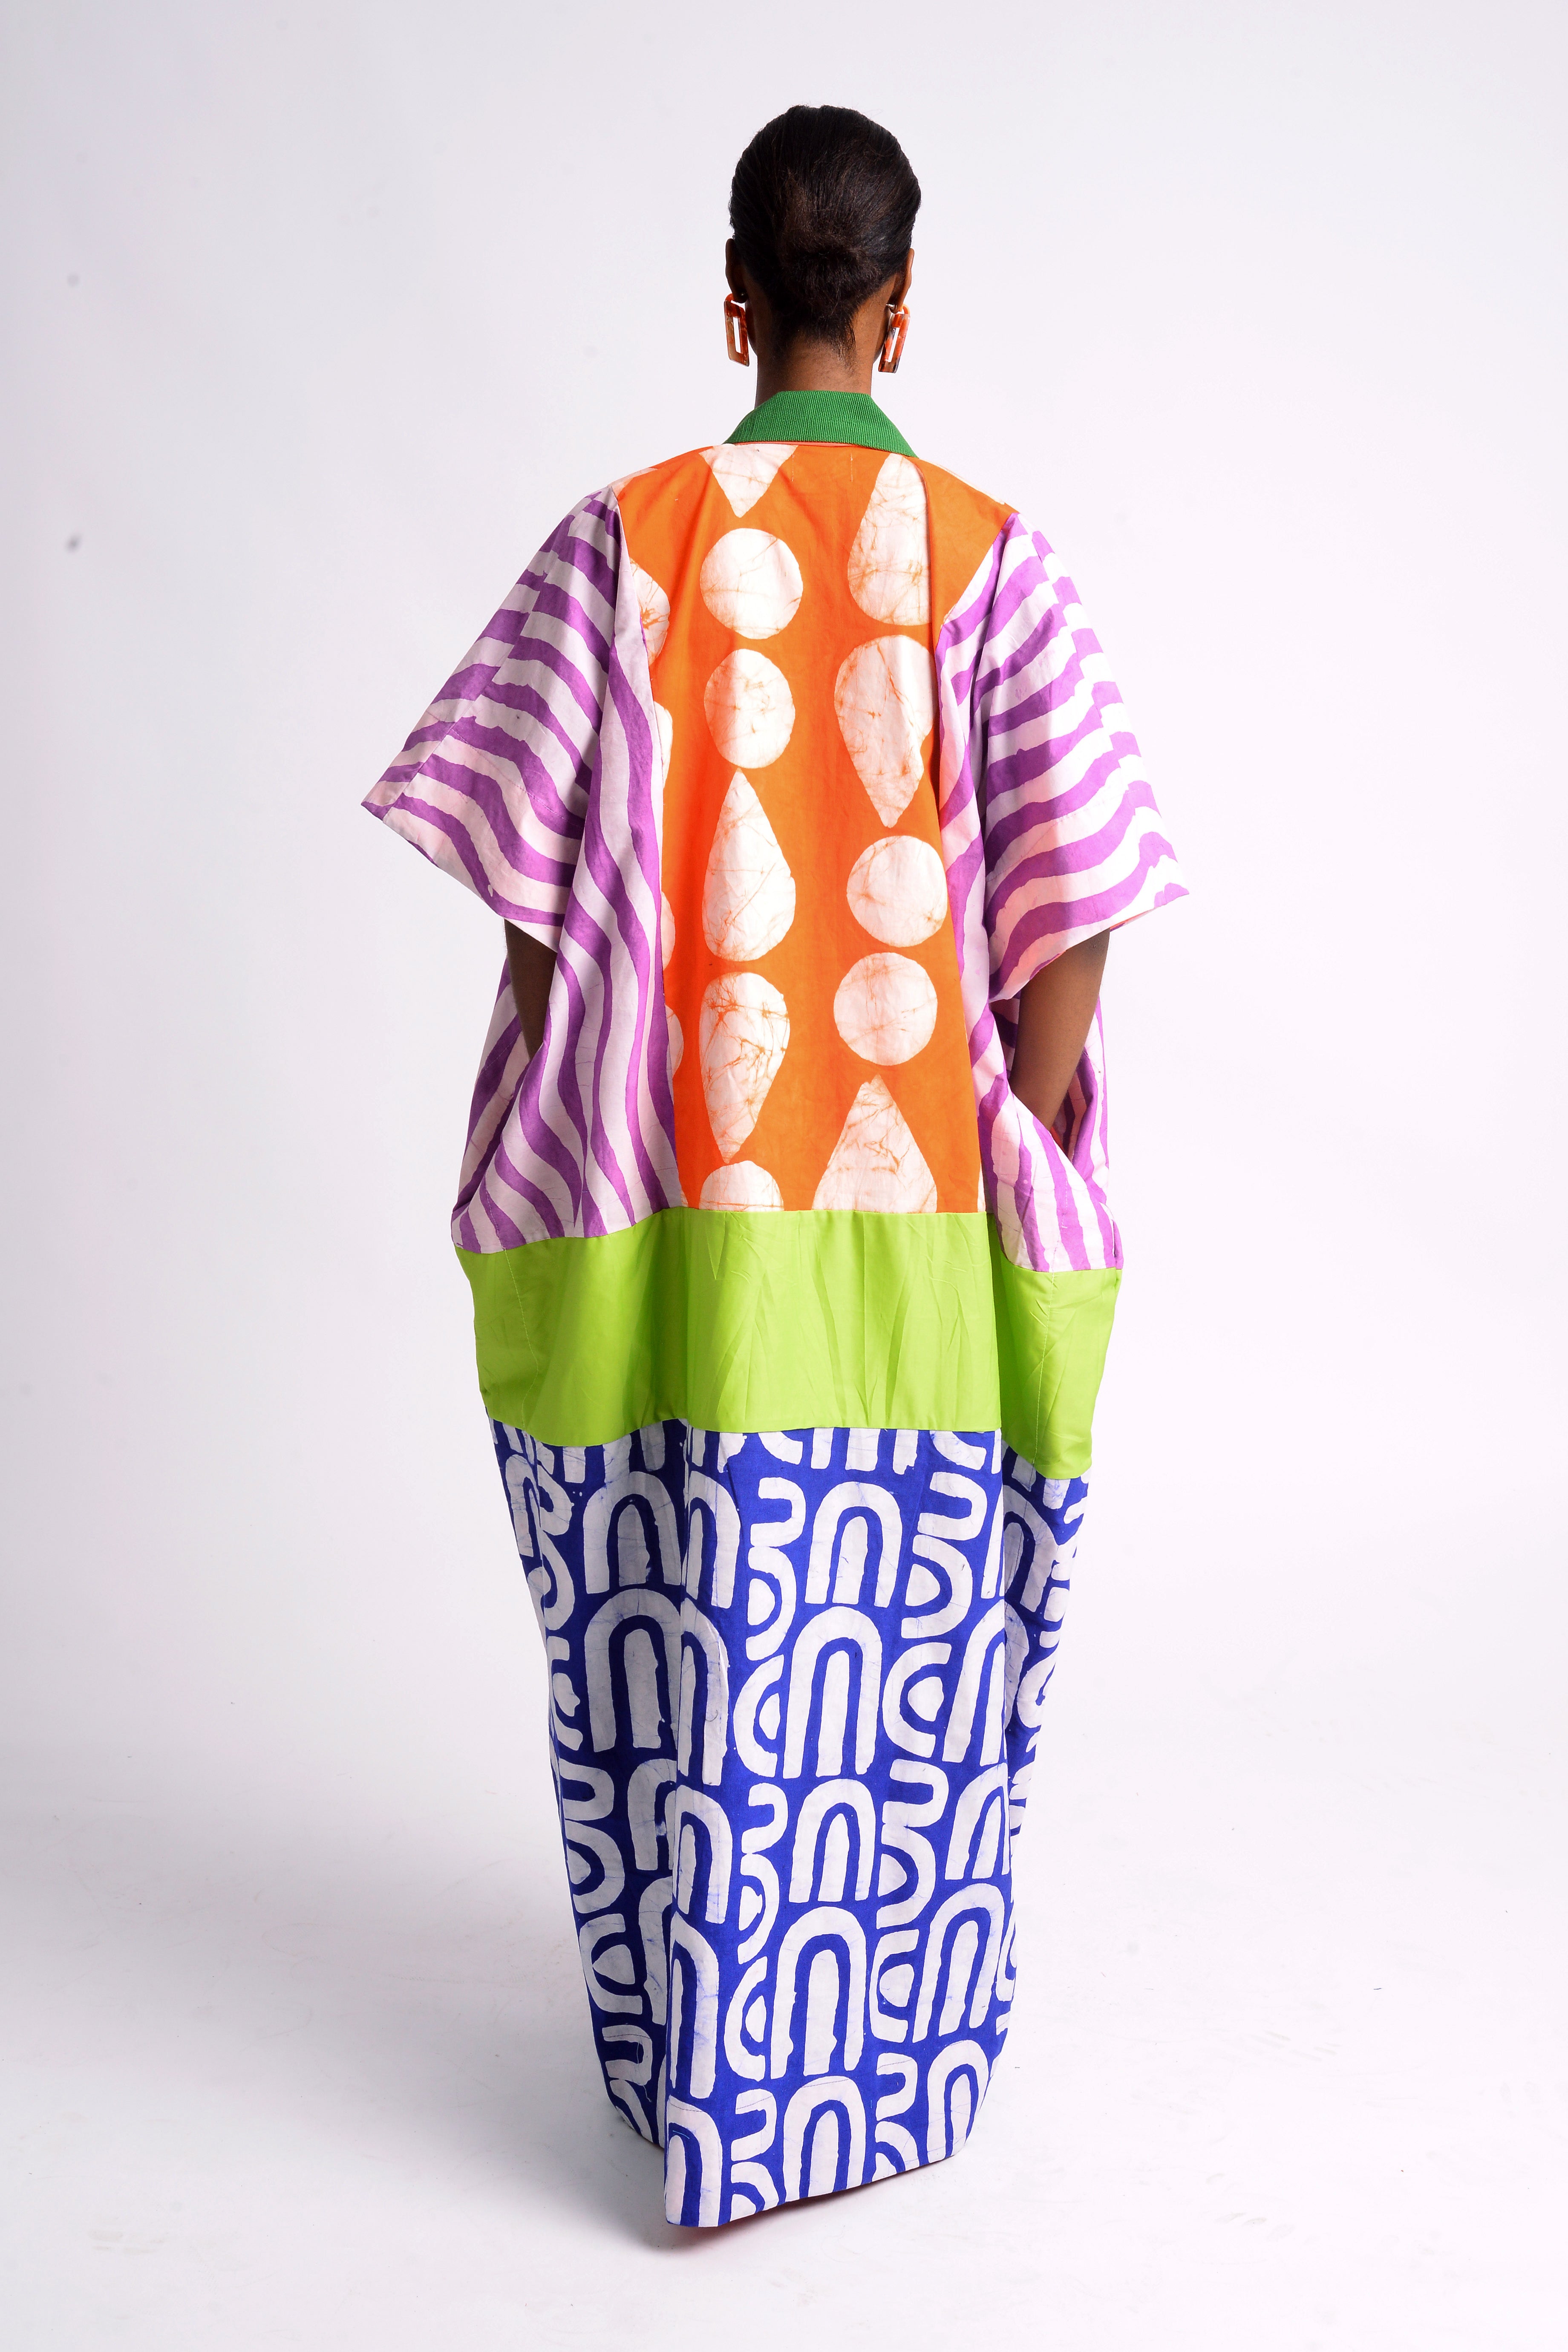 MULTICOLOURED MAXI AGBADA WITH BLUE AND WHITE PRINT BOTTOM